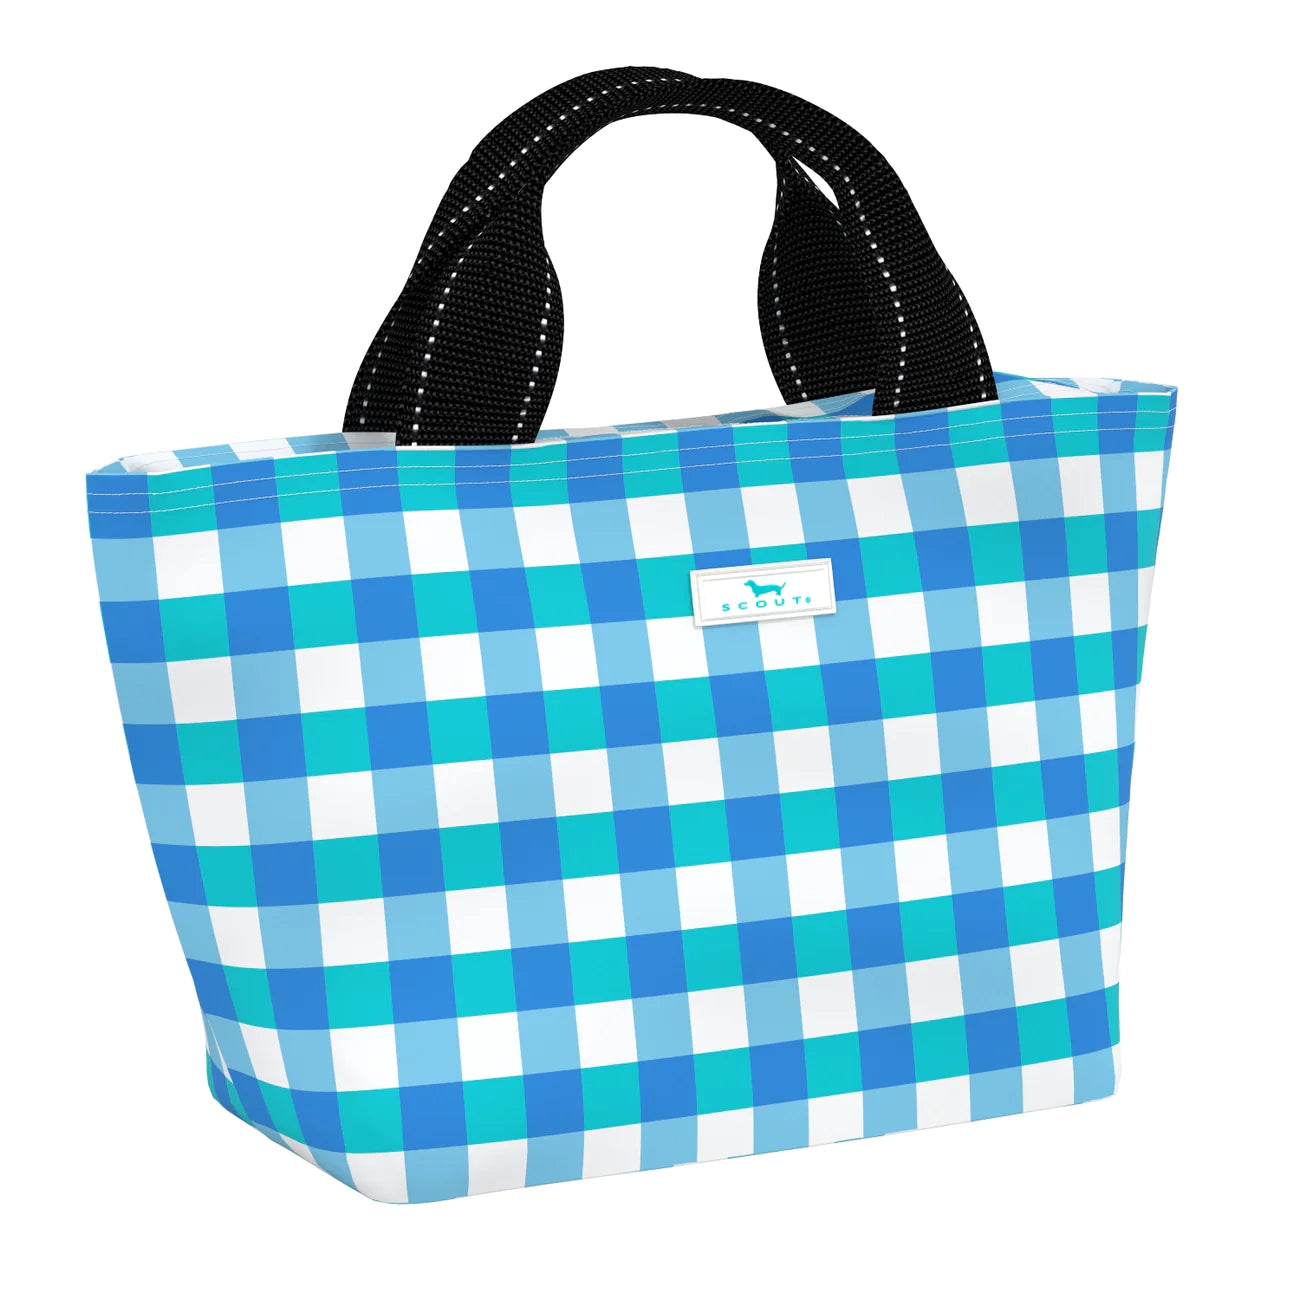 Friend of Dorothy Nooner Lunch Box by SCOUT Bags  SCOUT Bags   